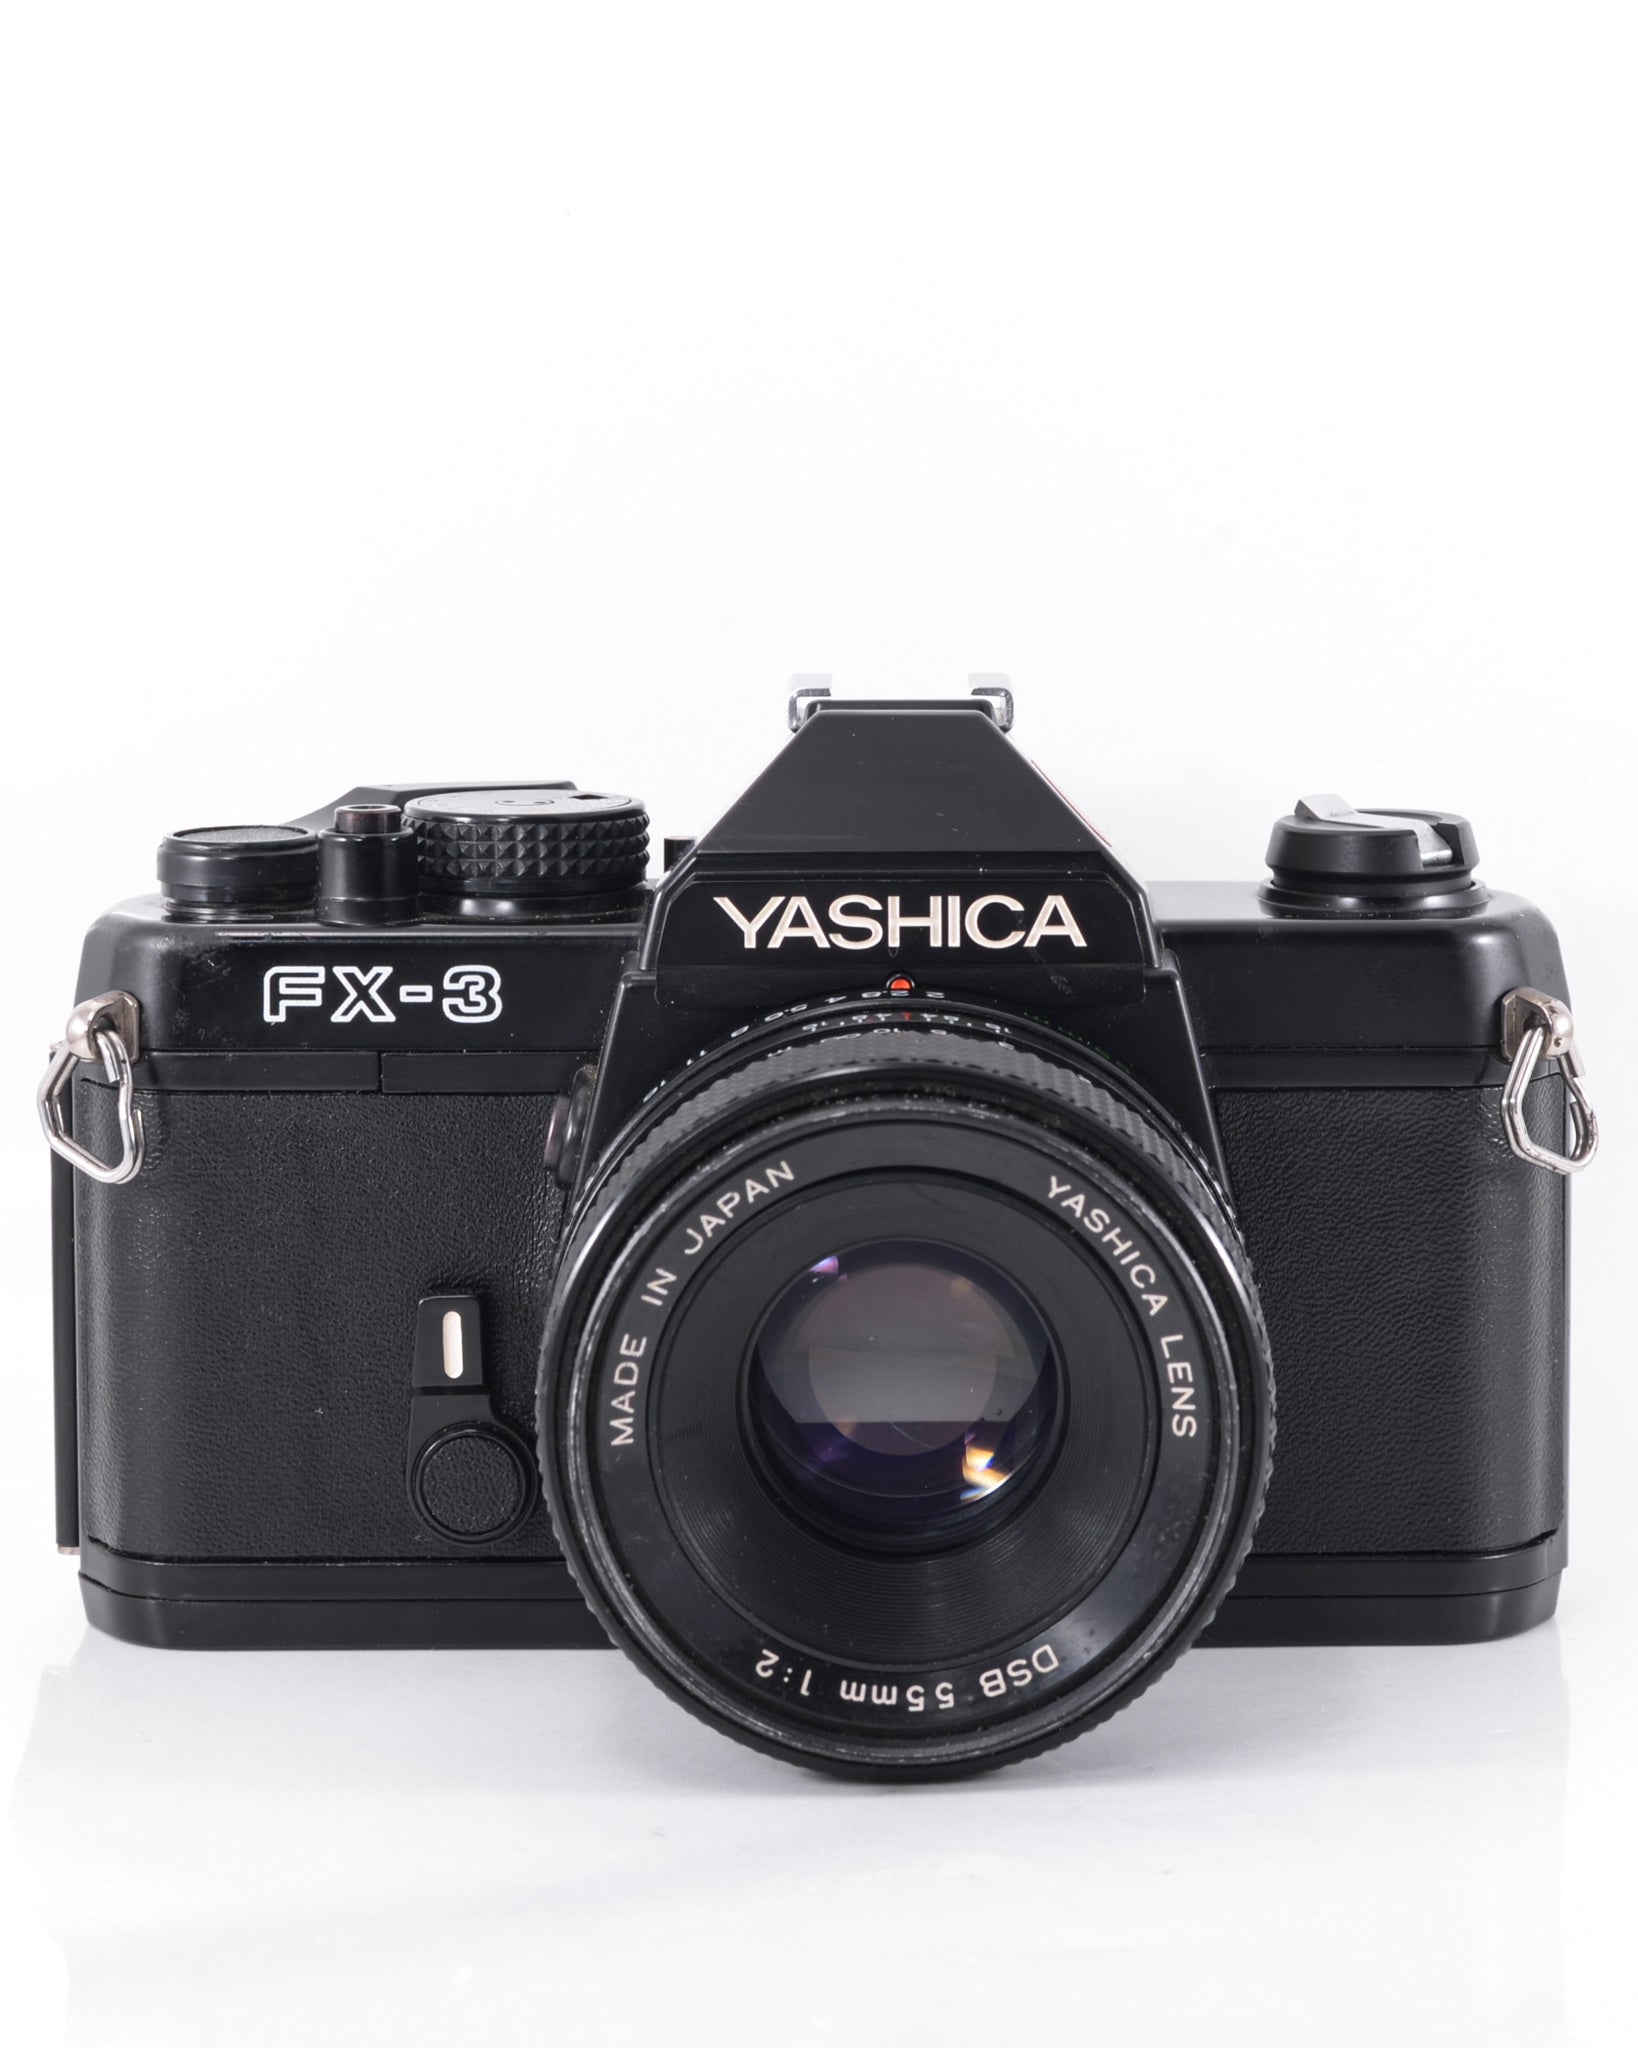 Yashica FX-3 35mm SLR film camera with 55mm f2 lens